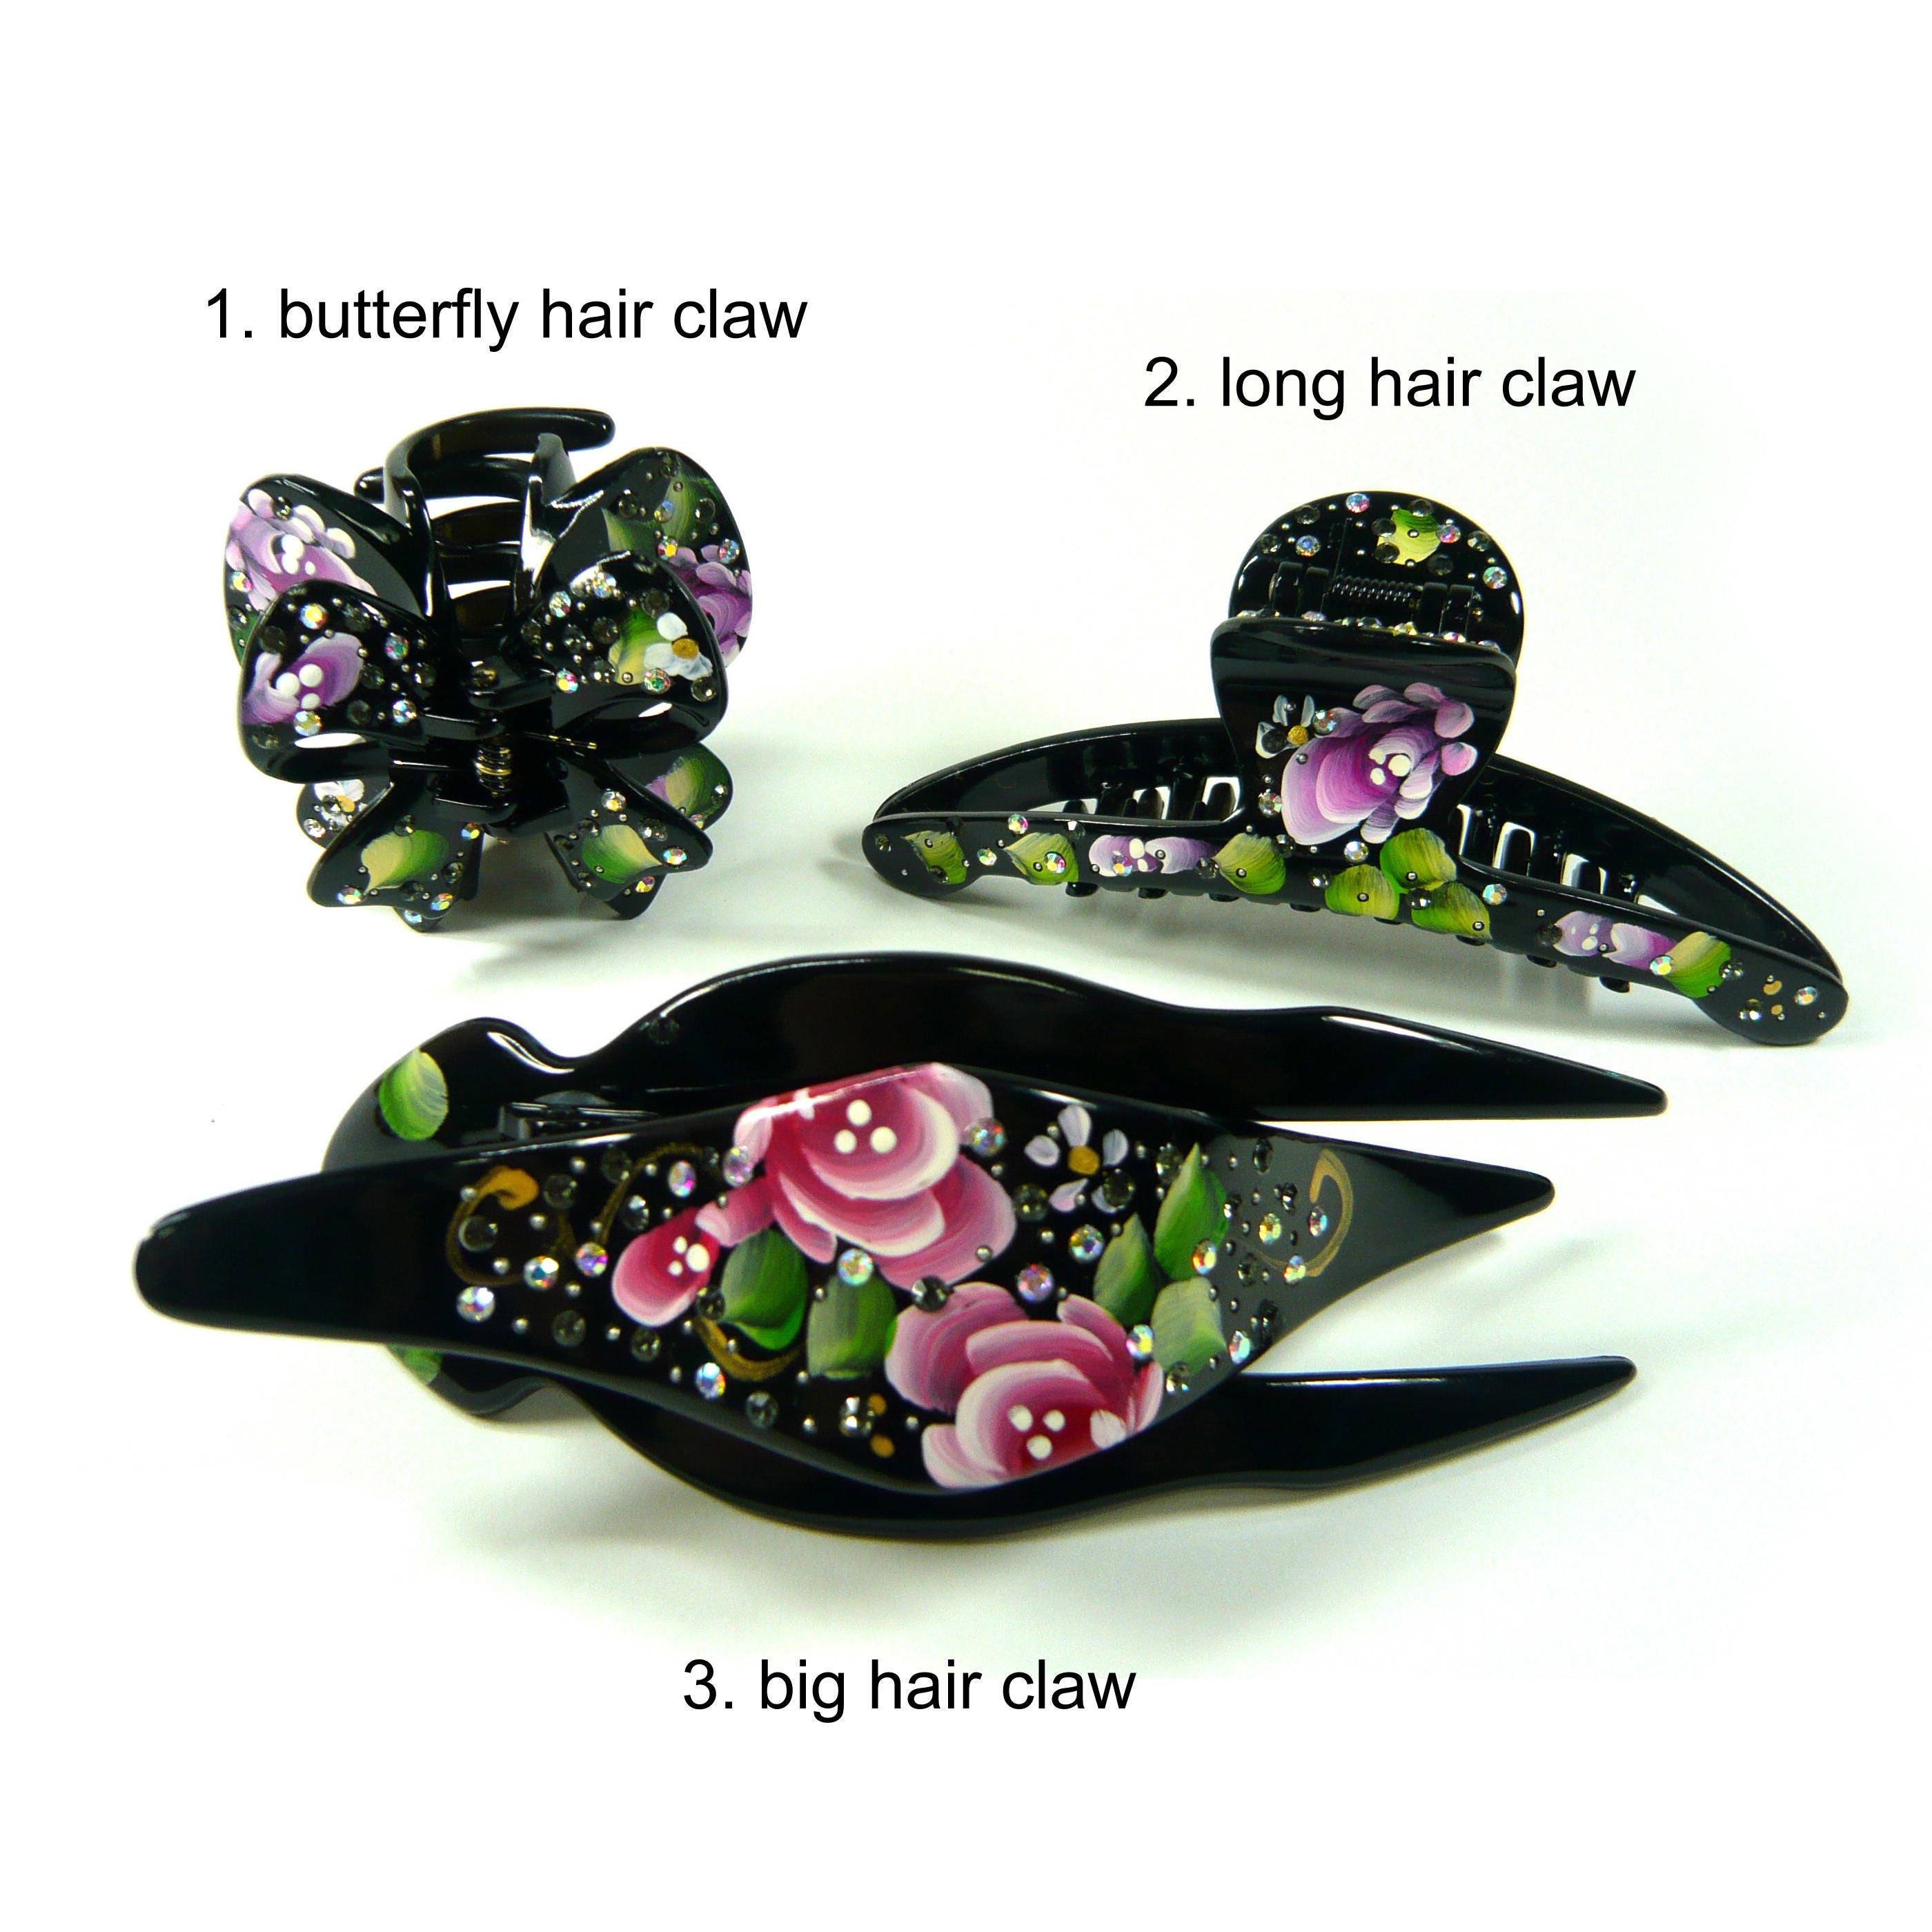 PACK OF 6 LARGE WIDE DIAMANTE GLITTERY HAIR CLIPS CLAW GRIP BUTTERFLY CLAMPS 